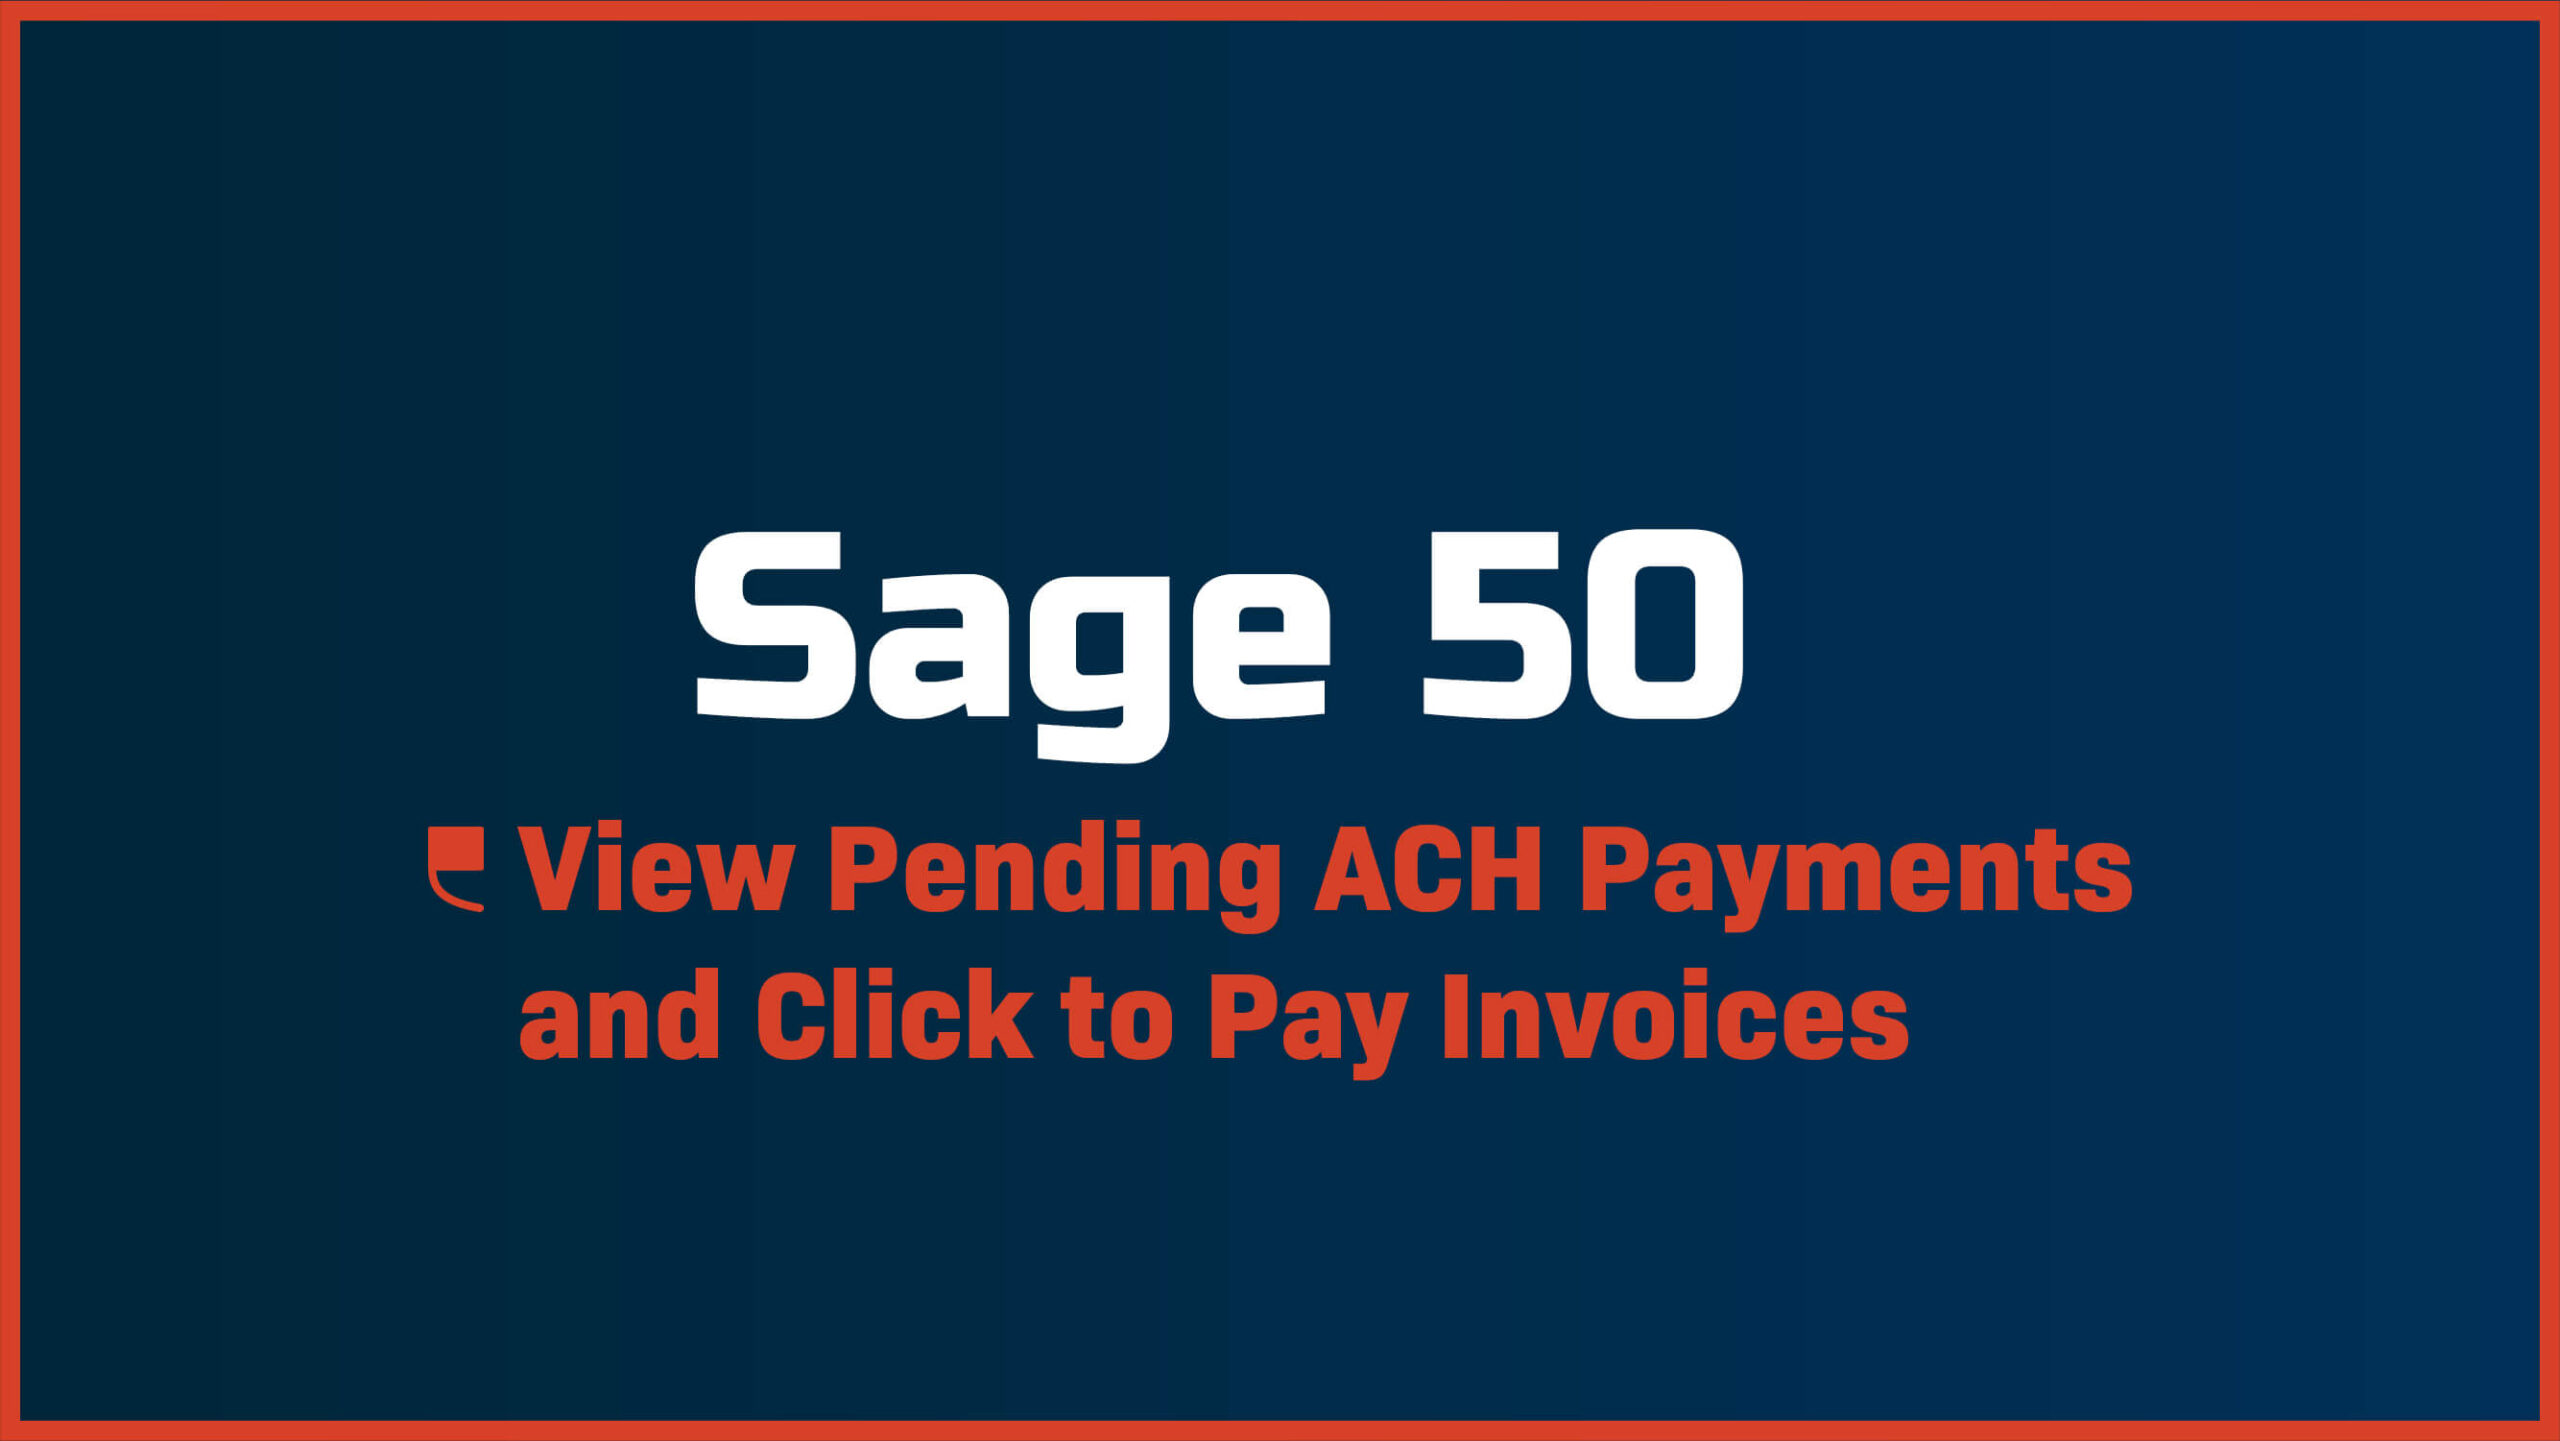 How to View Pending ACH Payments and ‘Click to Pay’ Invoices in Fortis Sage 50 Payments - Featured Image